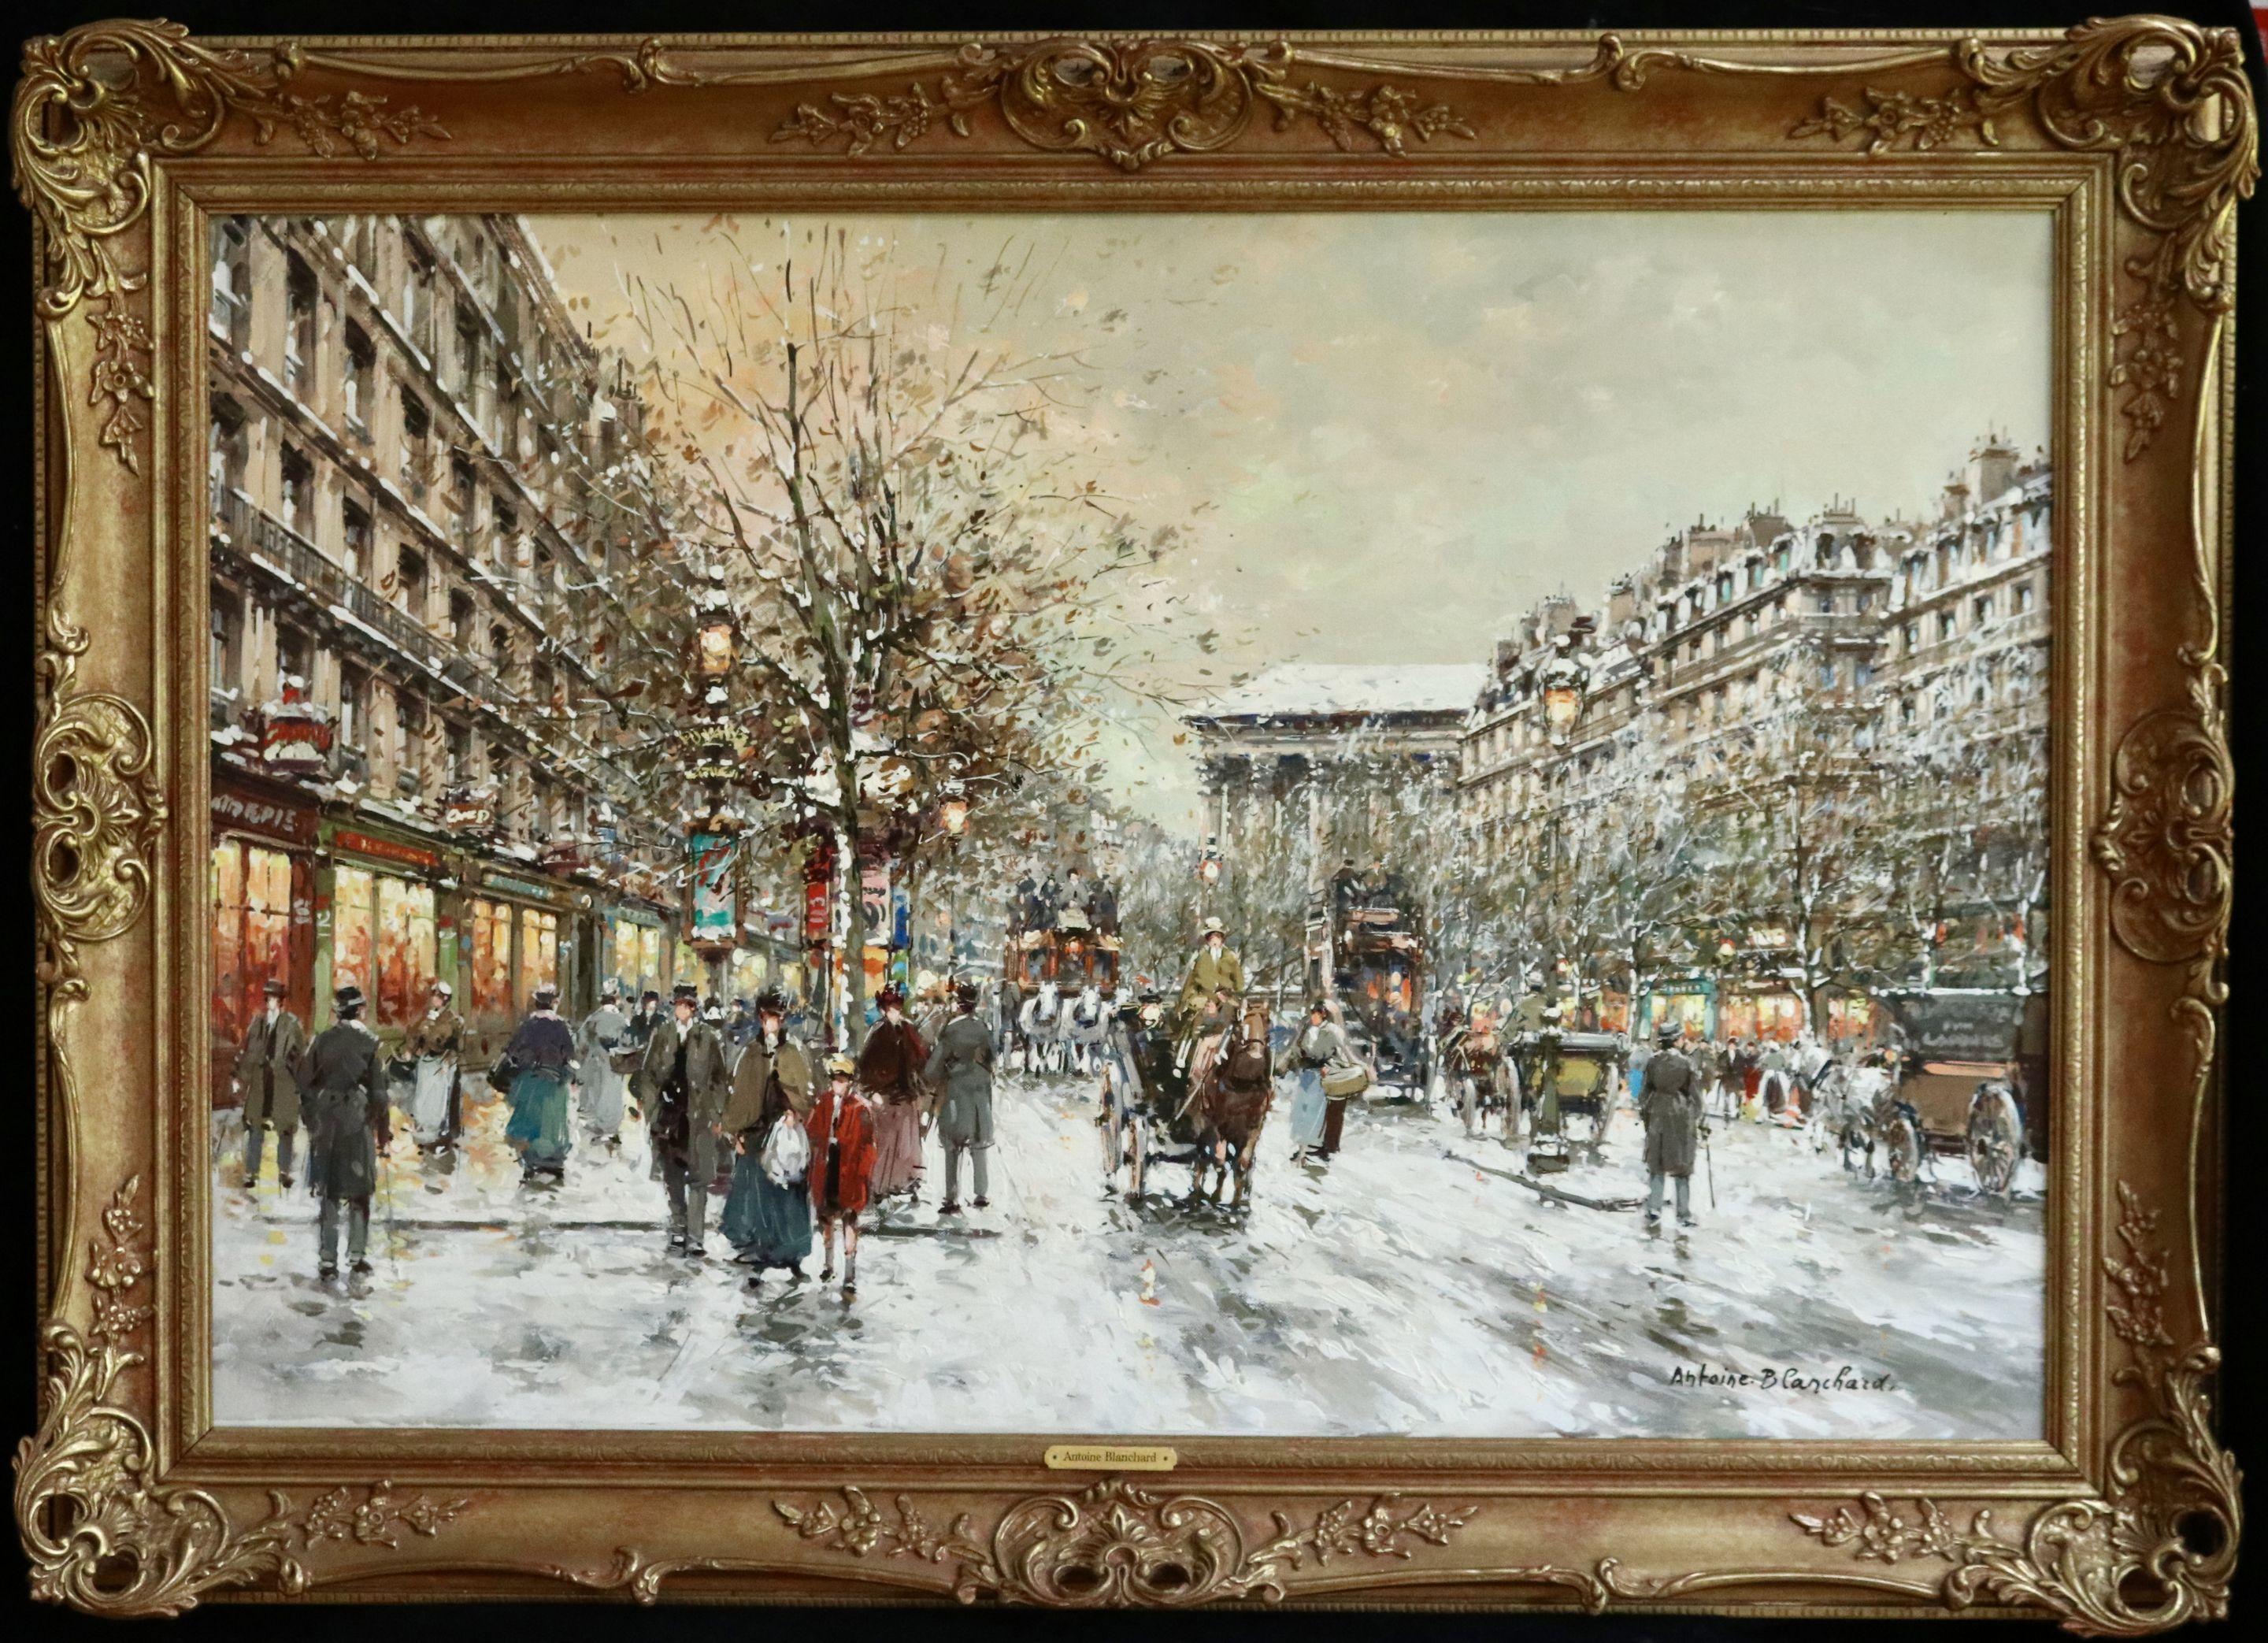 Boulevard de la Madeleine - 20th Century Oil, Figures in Cityscape by Blanchard - Painting by Antoine Blanchard